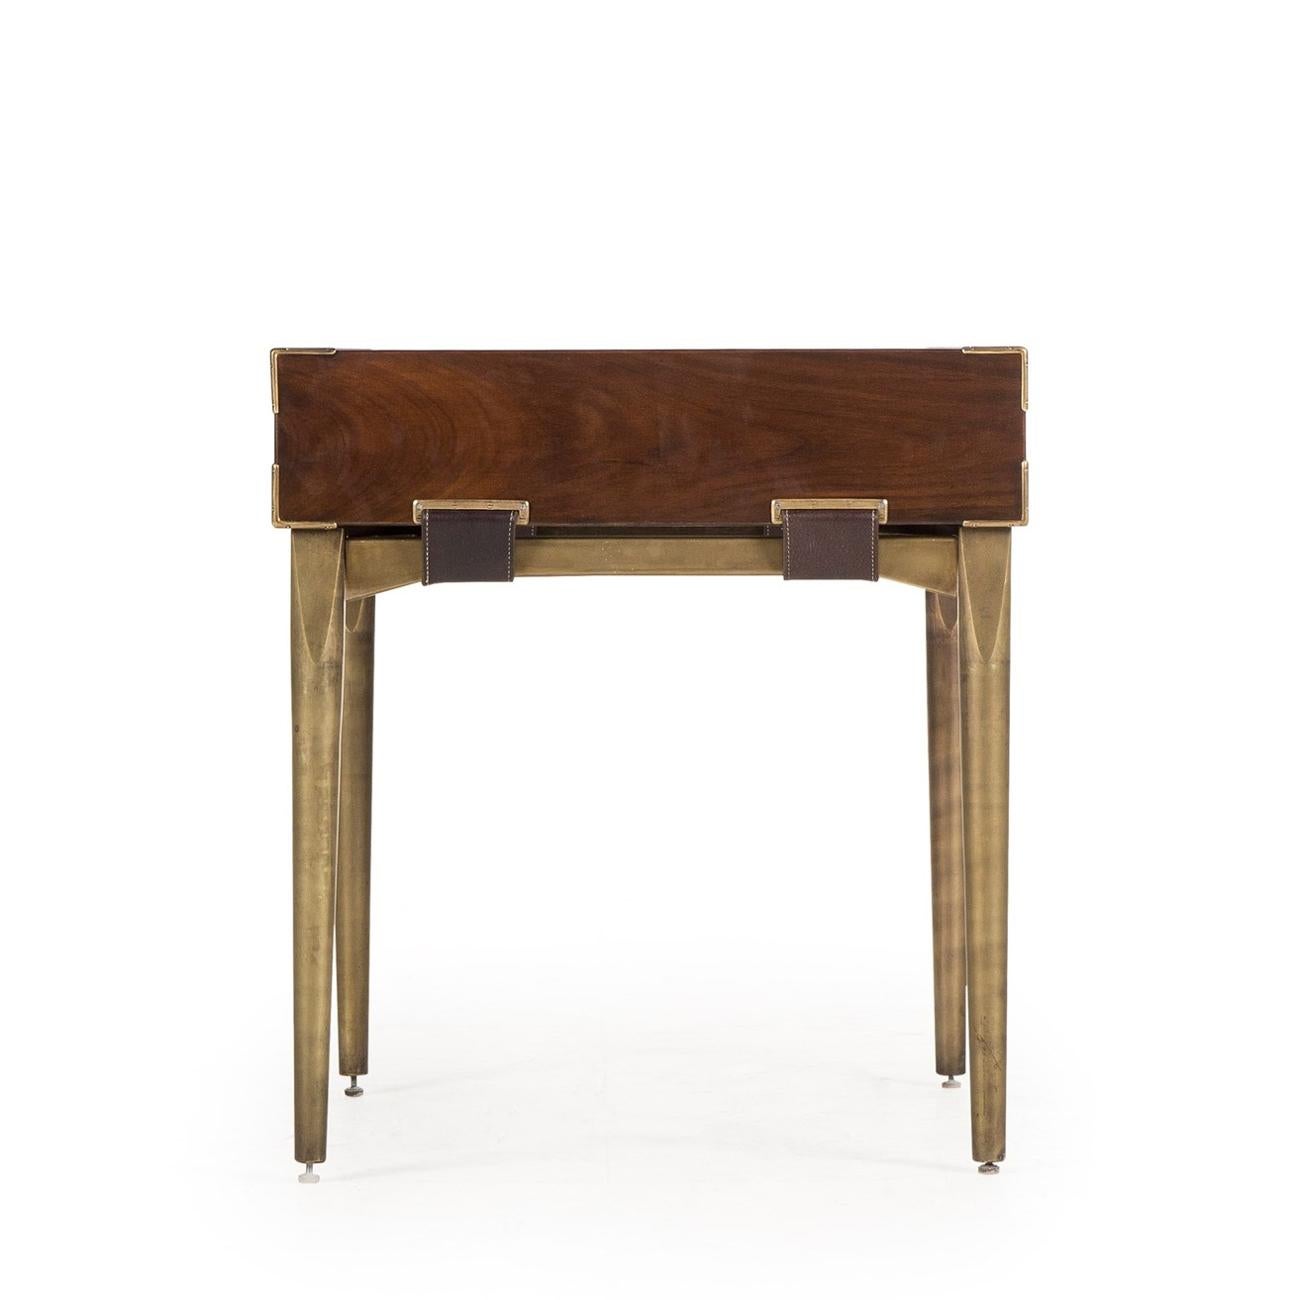 Hand-Crafted Desert Side Table with Vintage Brass Finish